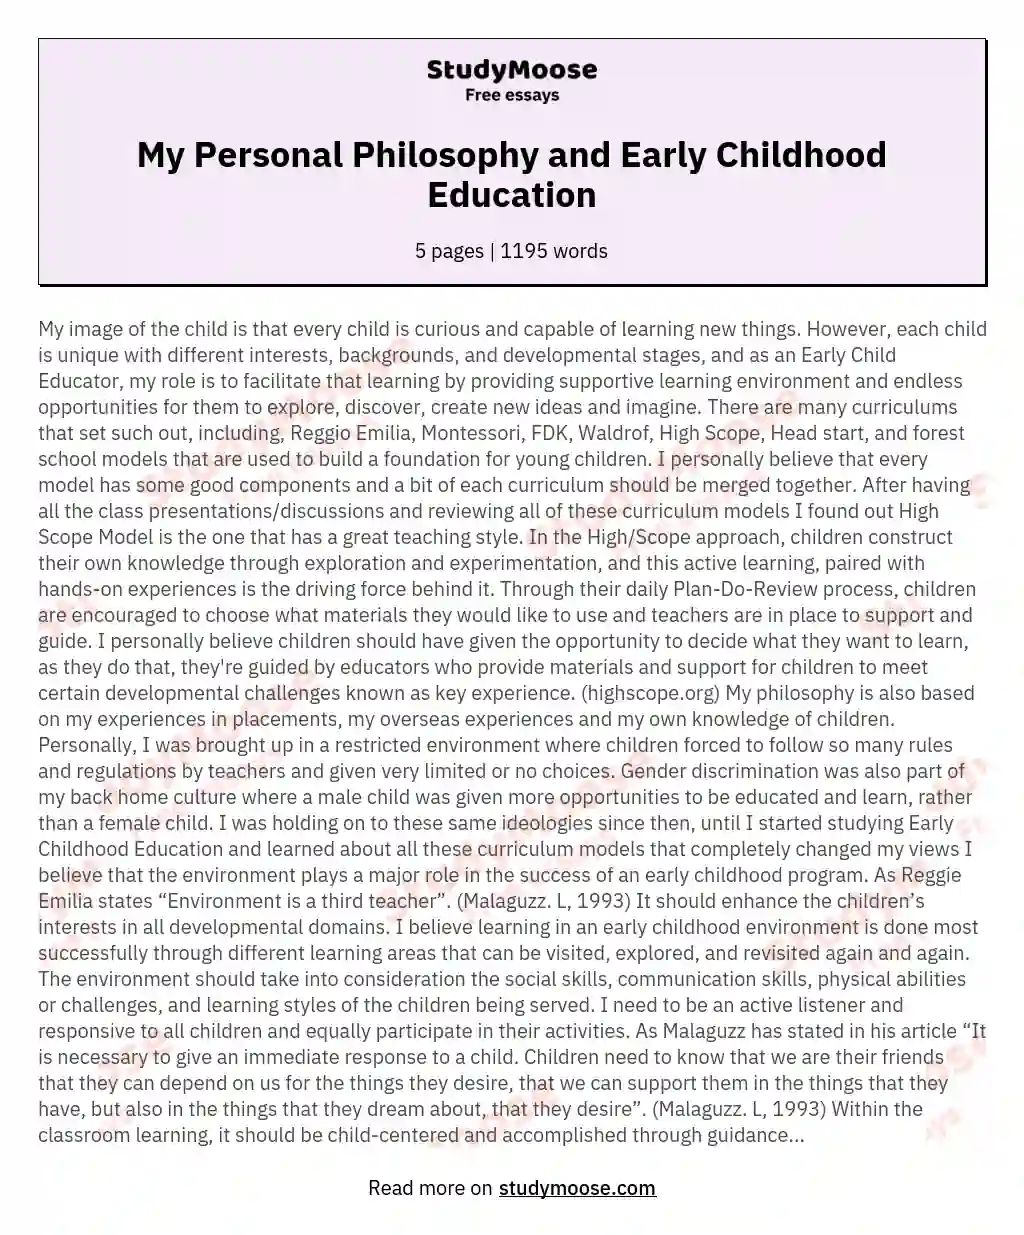 My Personal Philosophy and Early Childhood Education